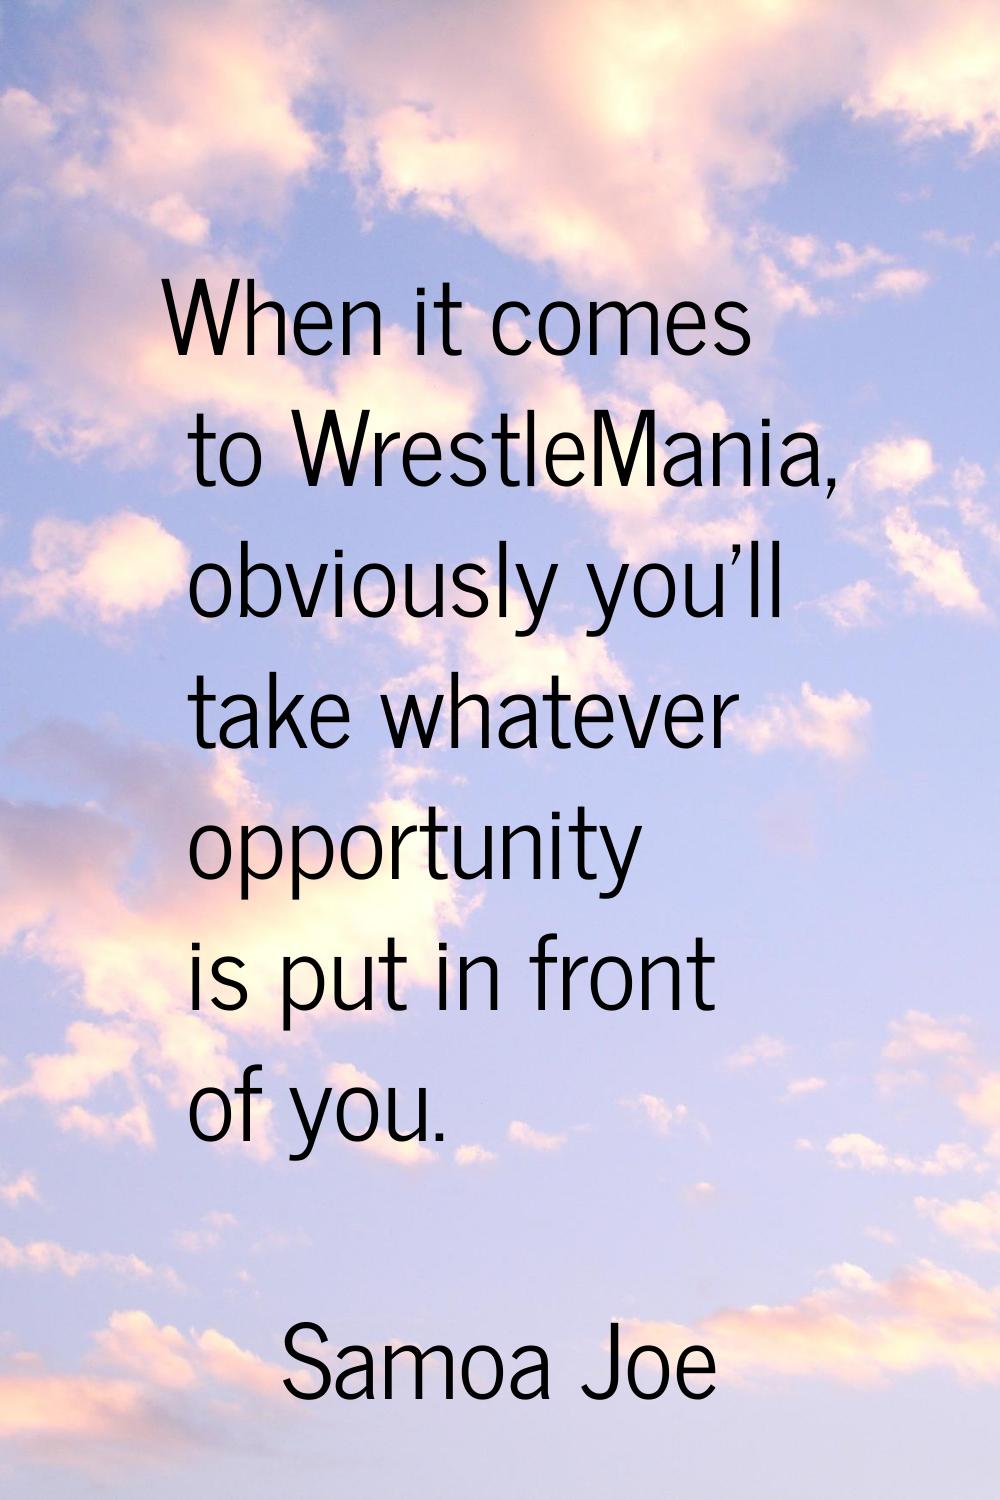 When it comes to WrestleMania, obviously you'll take whatever opportunity is put in front of you.